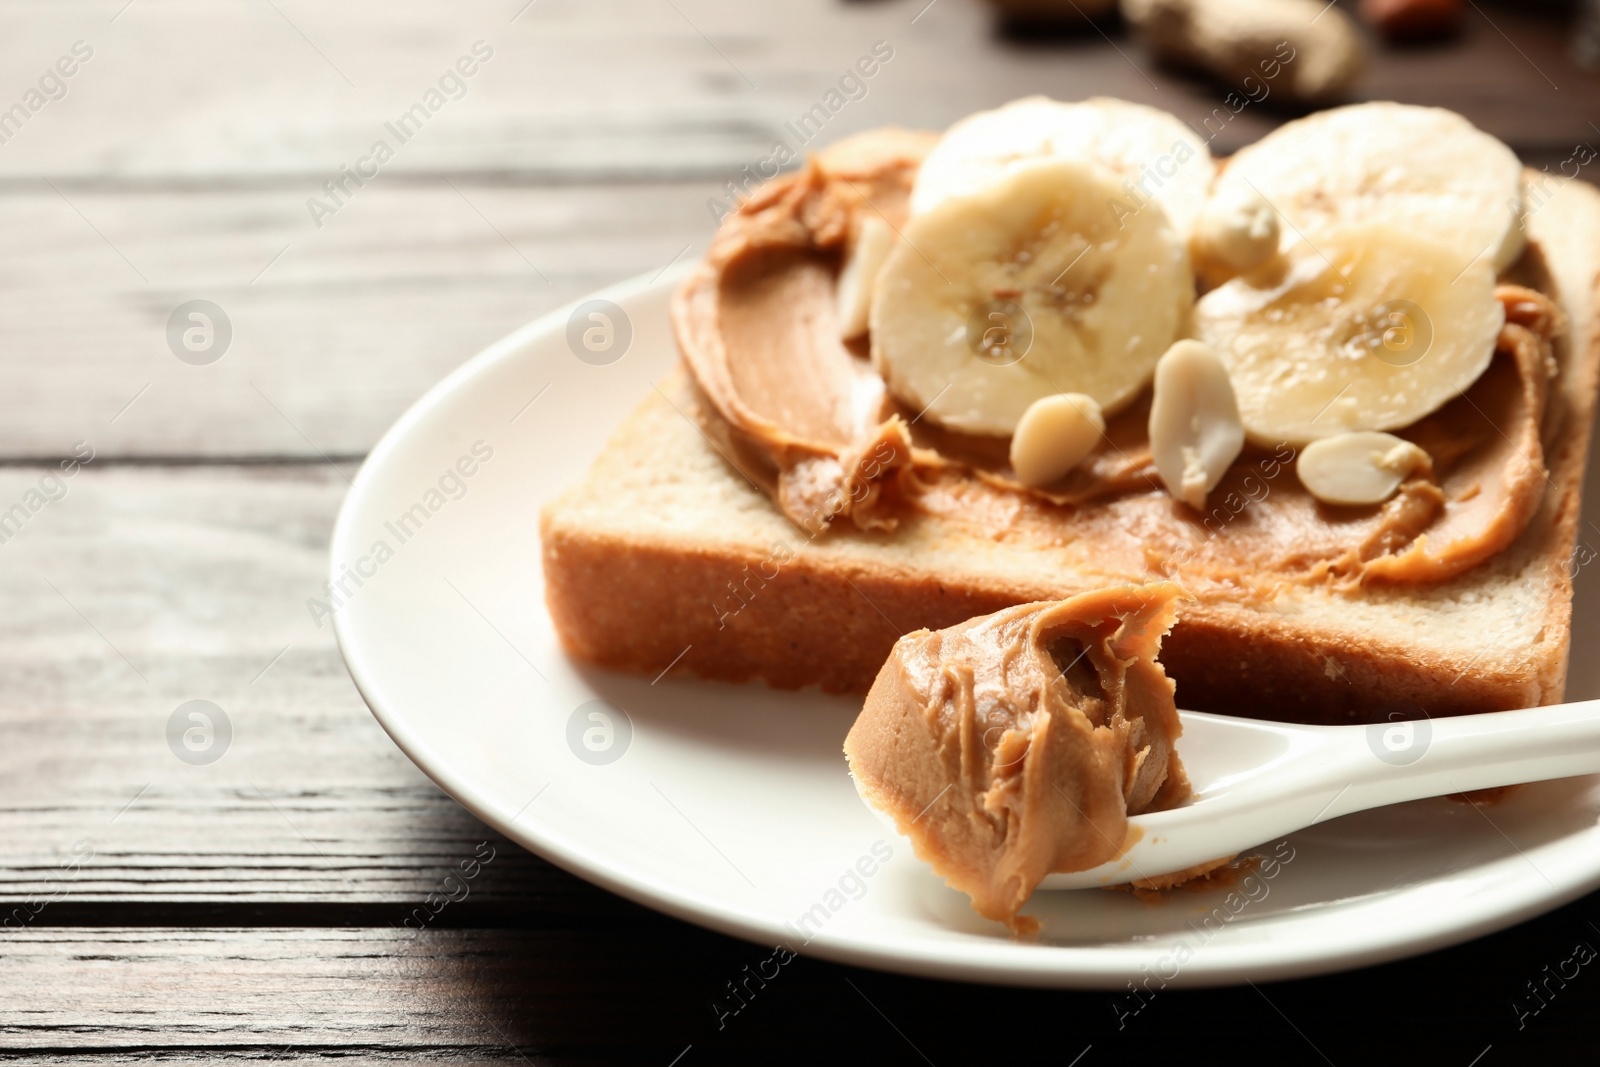 Photo of Toast bread with peanut butter and banana slices on wooden table, closeup